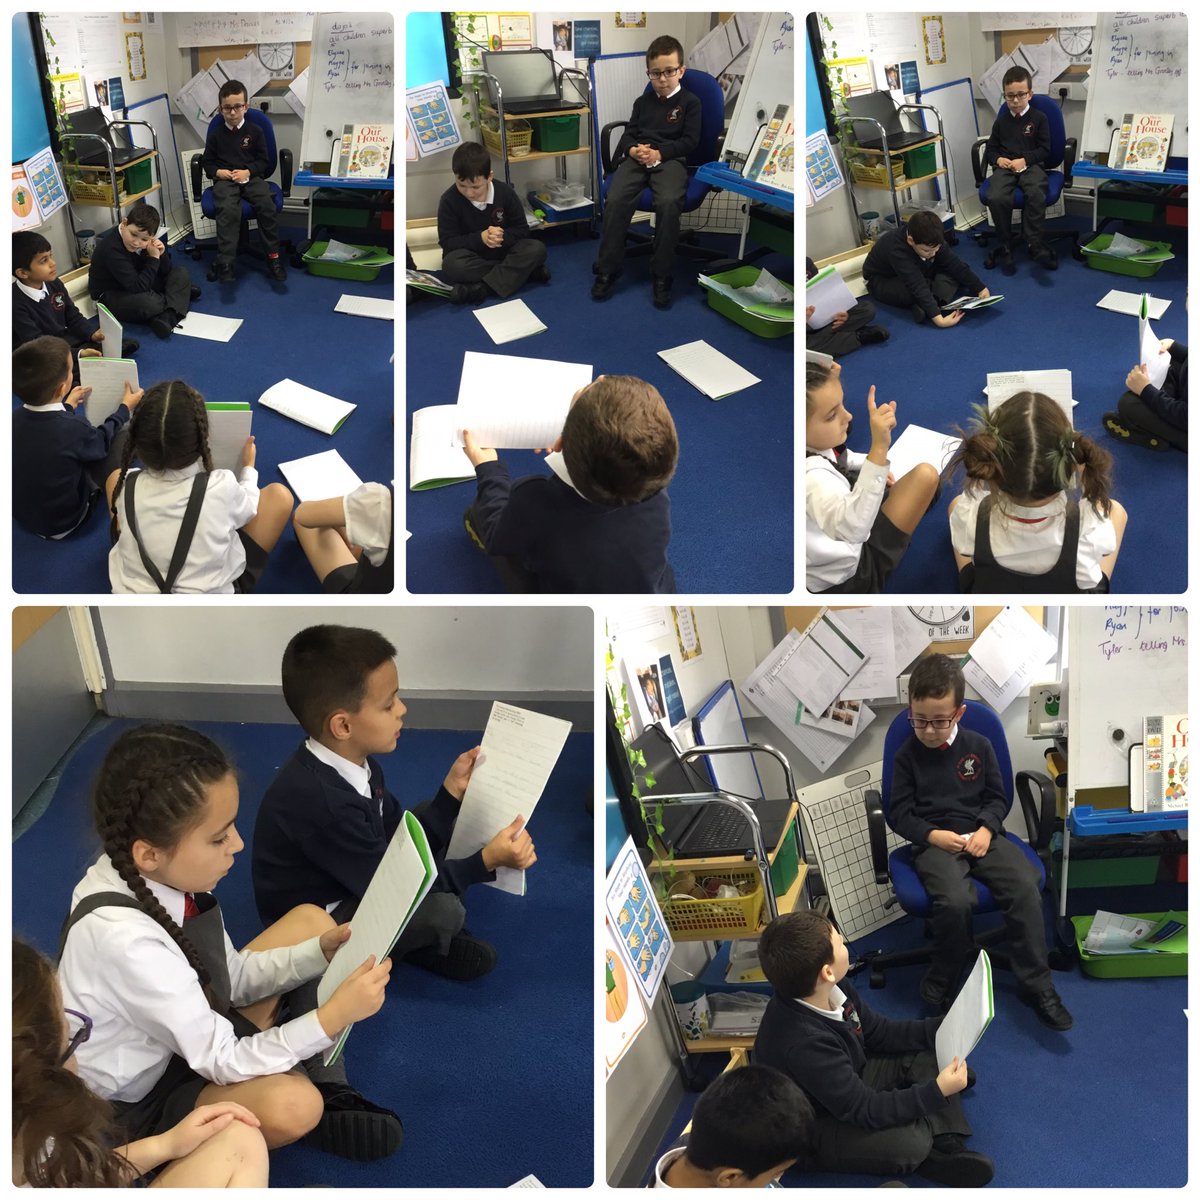 Class 7 hot seated George today from ‘ This is OUR house.’ We thought about and wrote our questions, then read them out to George.  Great speaking and listening by all. #pleasantstreaders